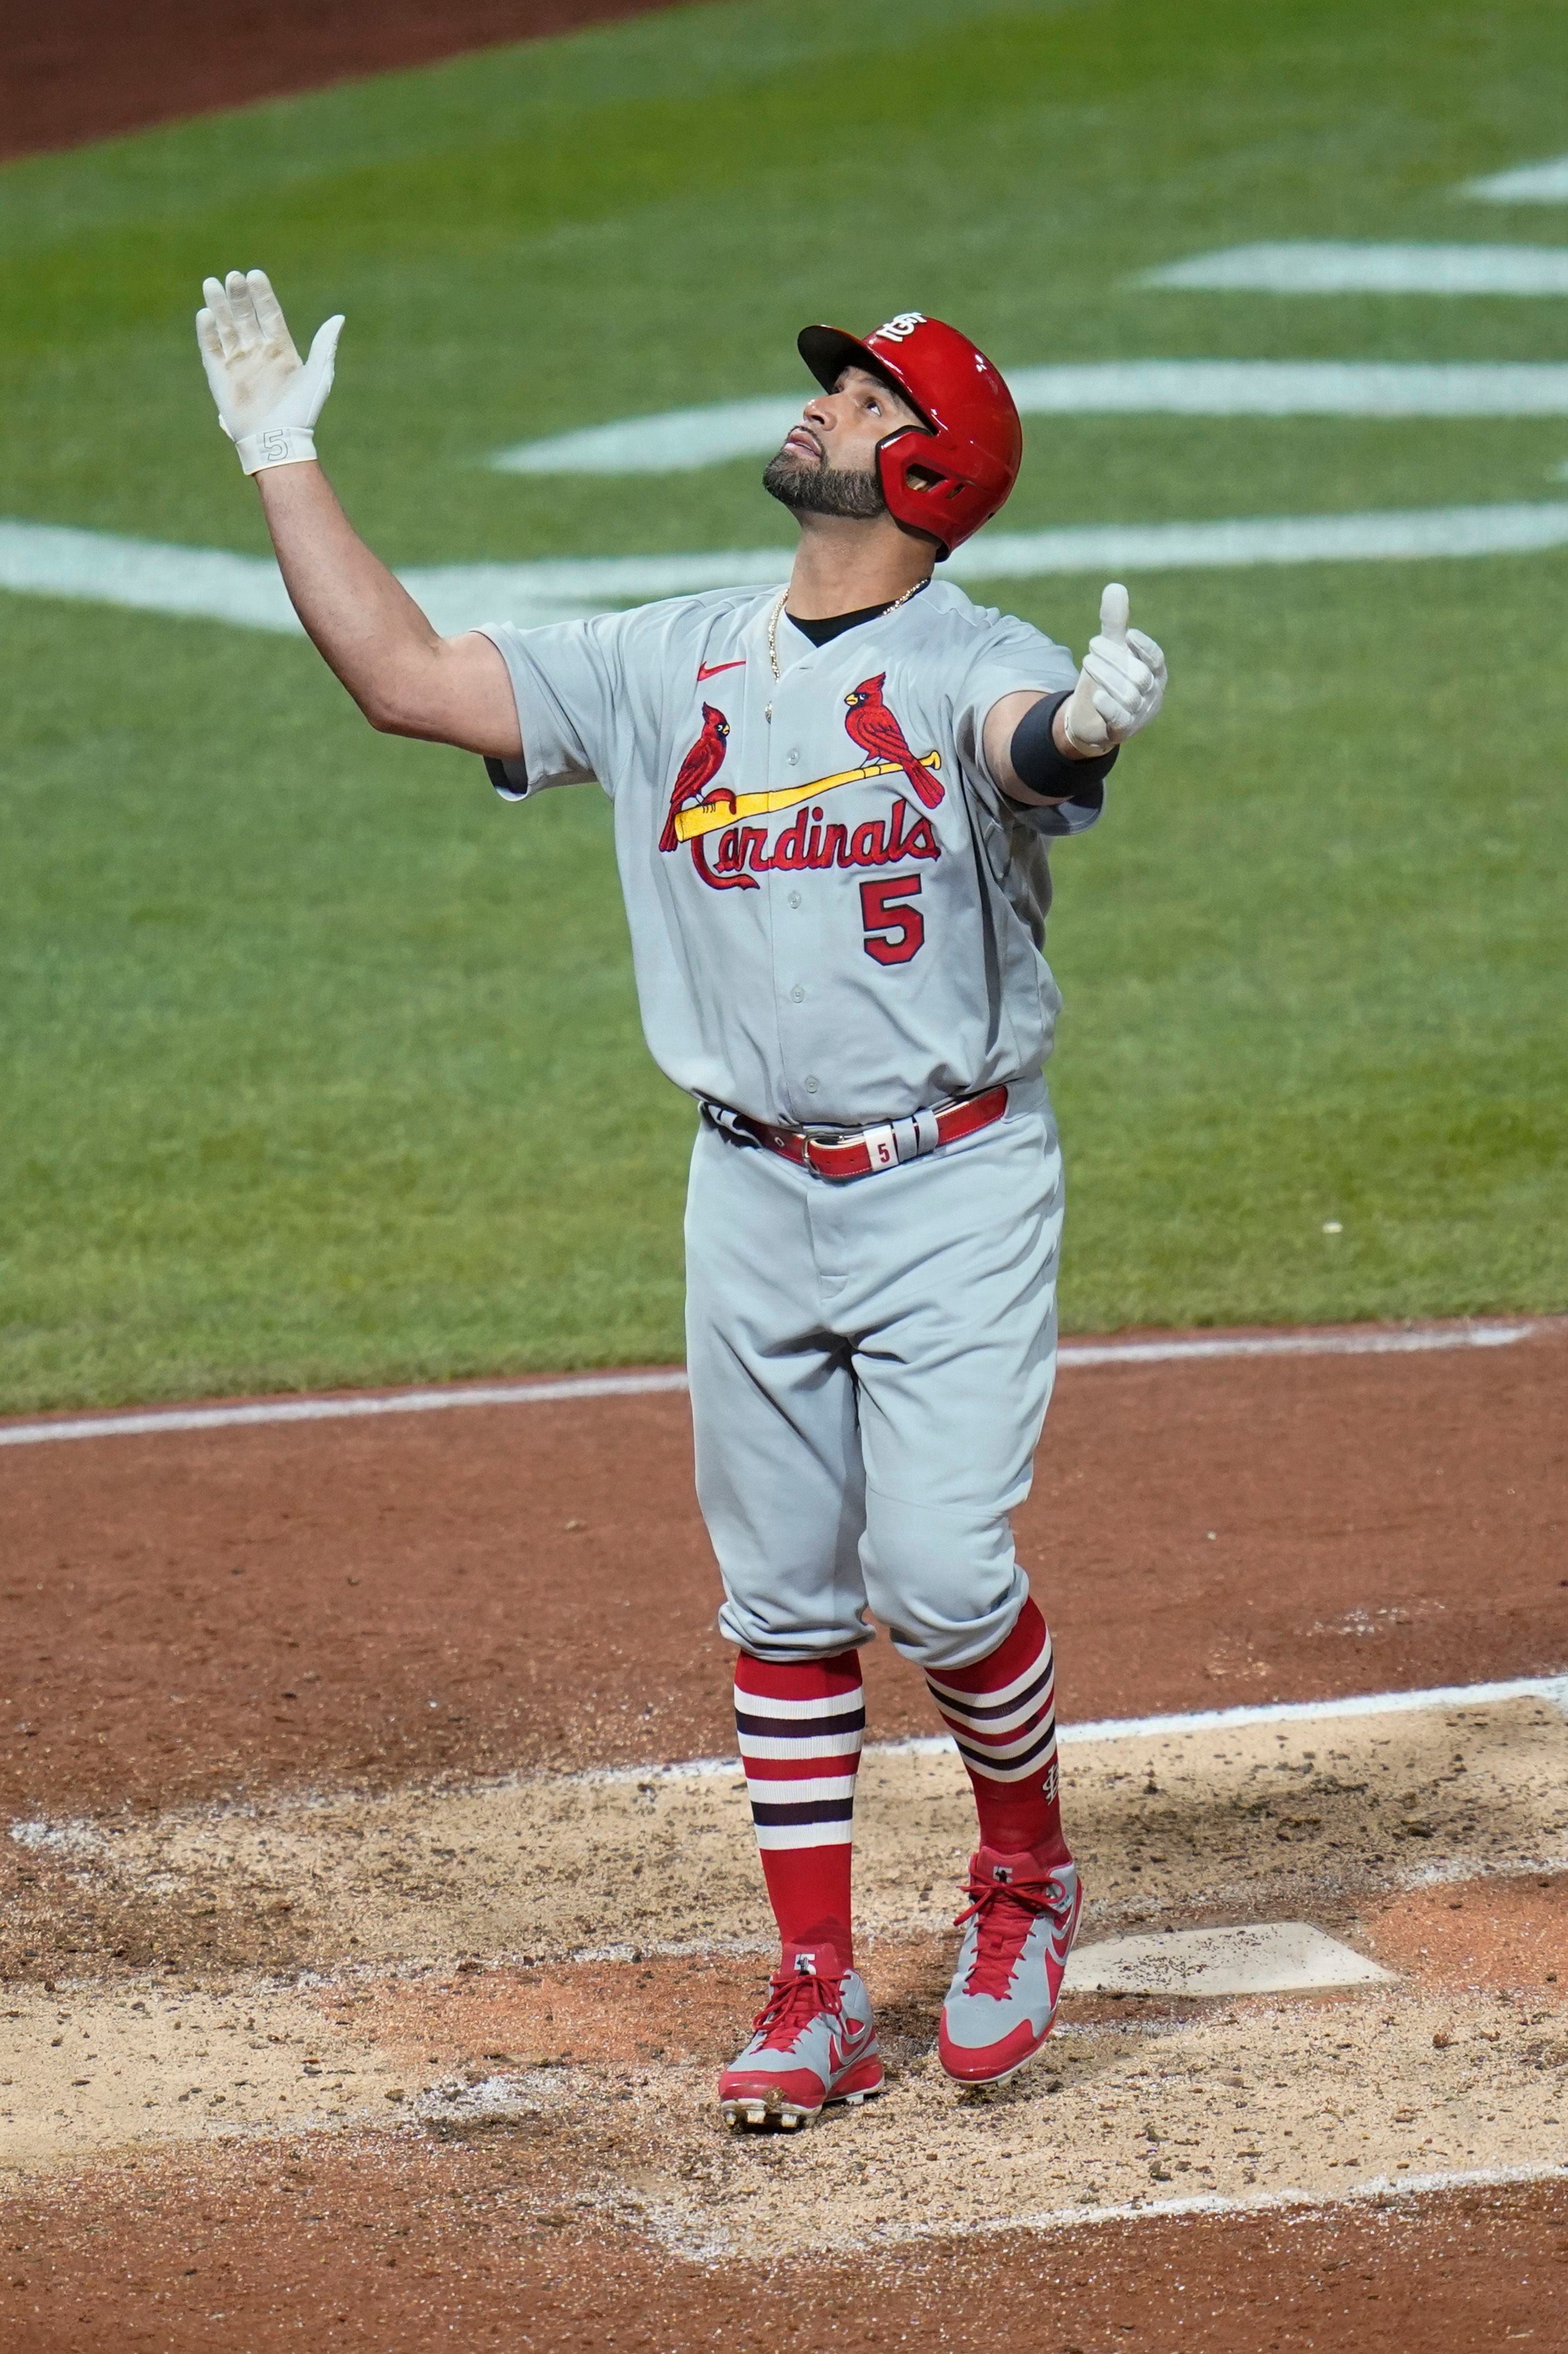 Albert Pujols hits 703rd HR to pass Babe Ruth in RBI; St. Louis